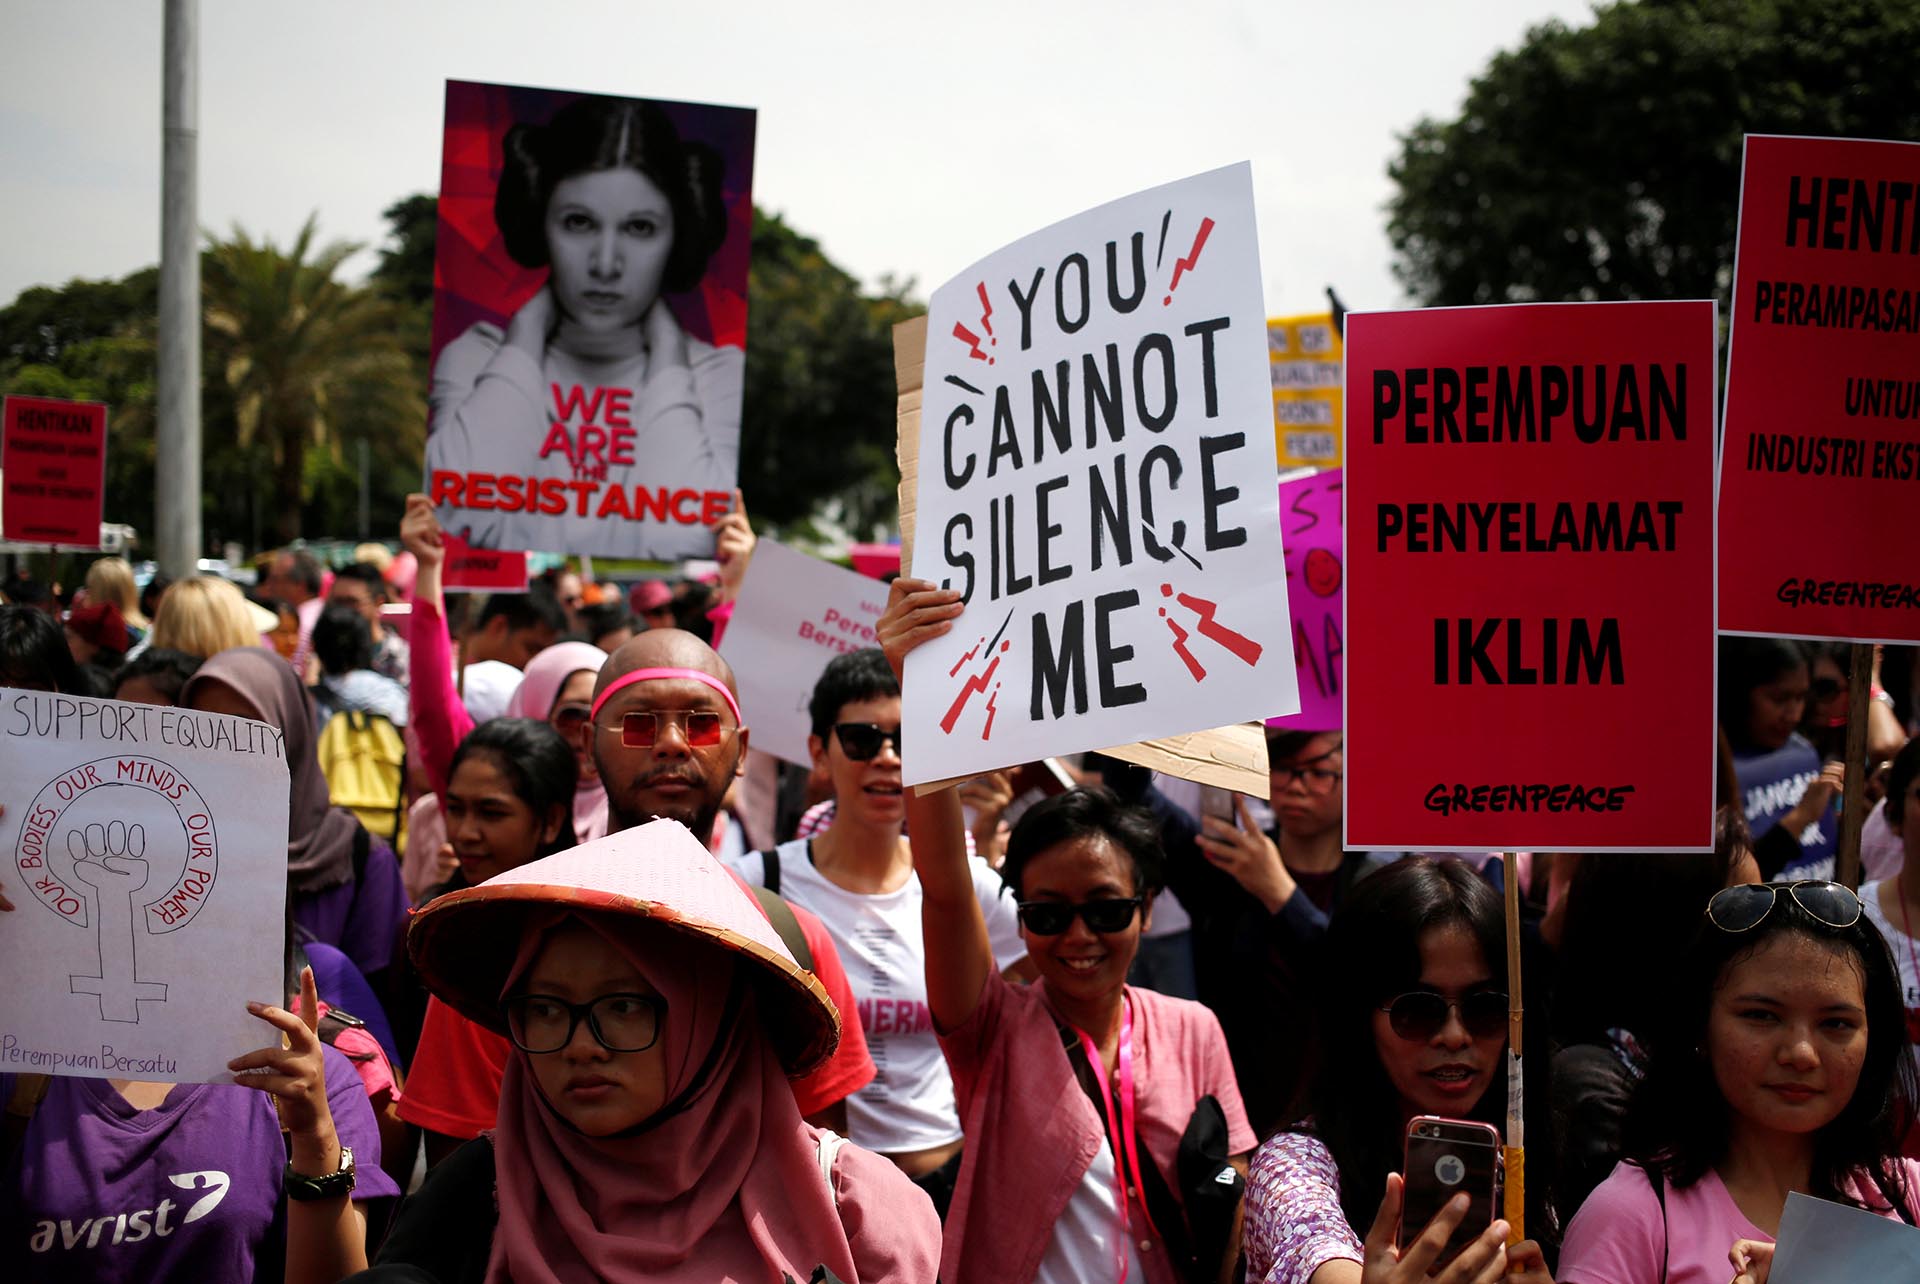 People take part in a rally calling for women's rights and equality ahead of International Women's Day in Jakarta, Indonesia, March 4, 2017. REUTERS/Darren Whiteside